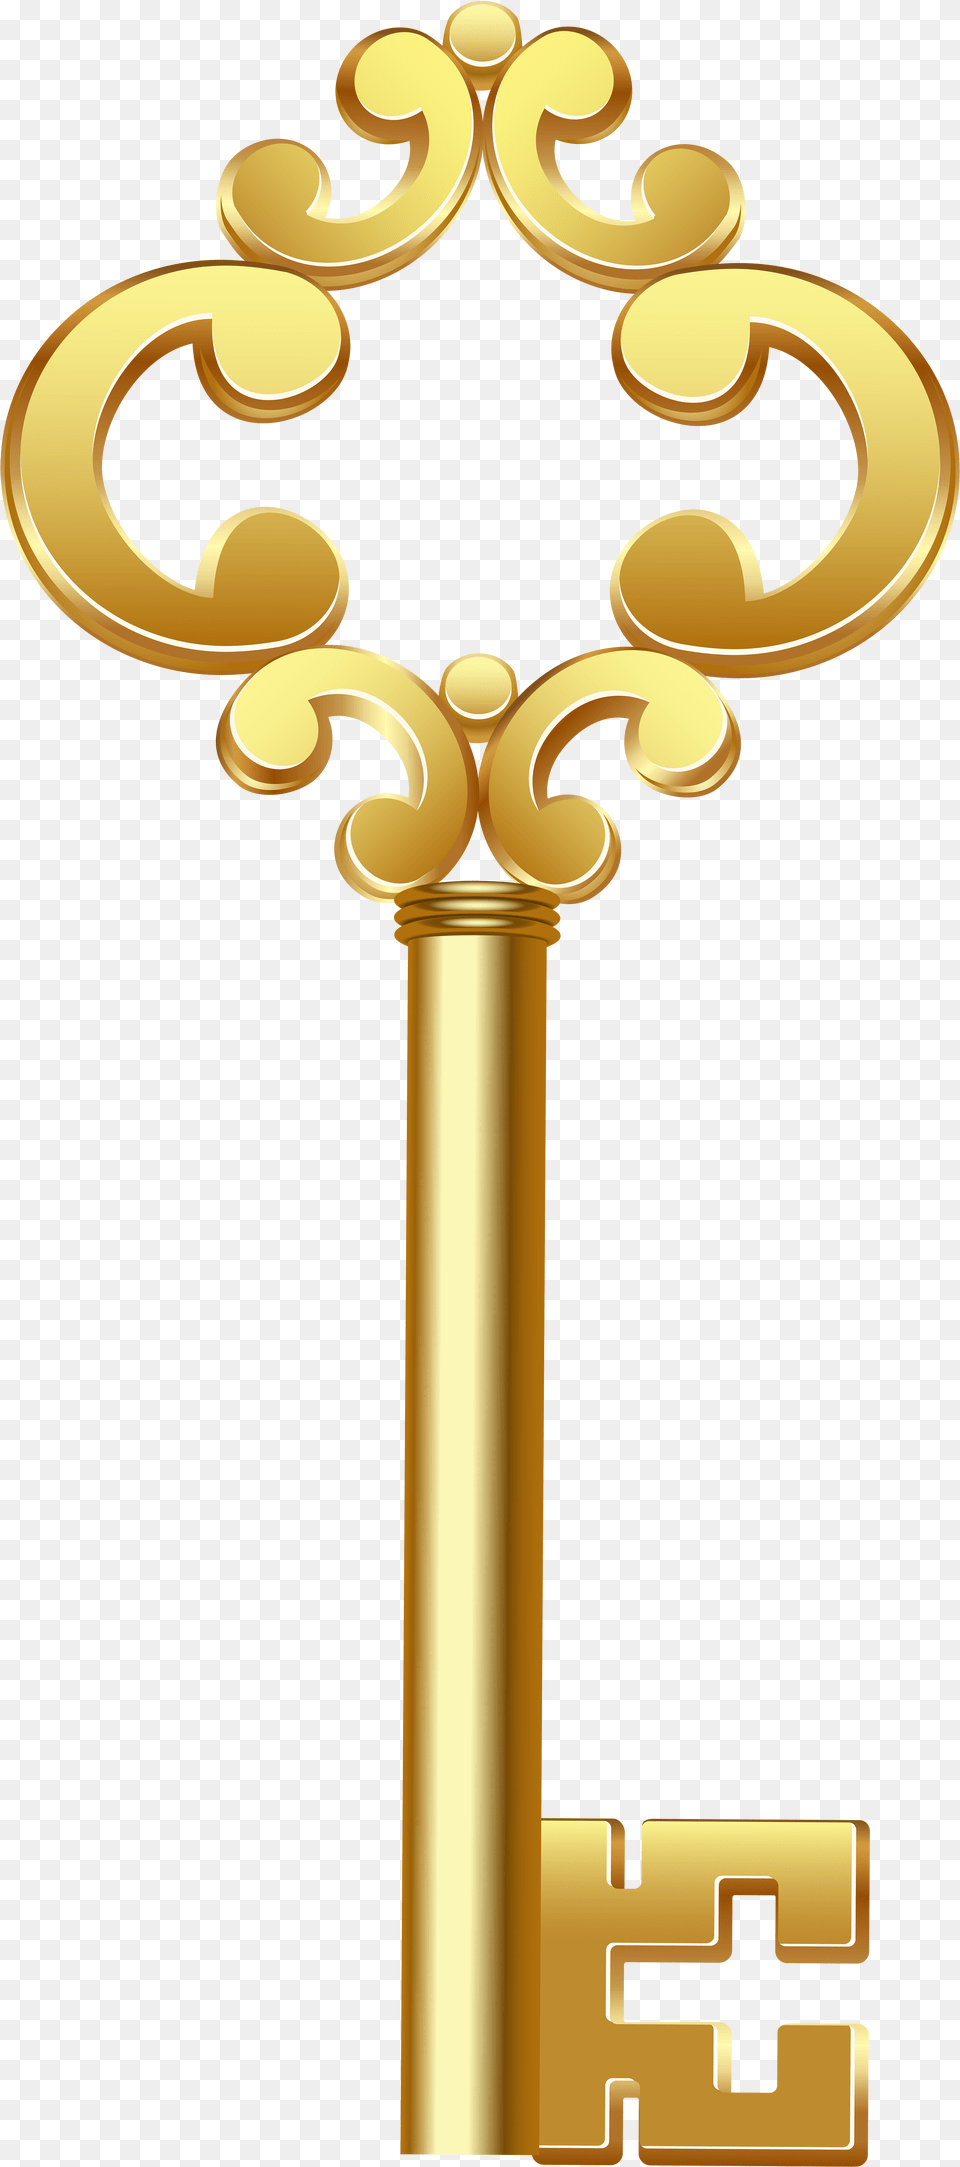 Library Of Gold House Royalty Gold Key Cross, Symbol Free Transparent Png